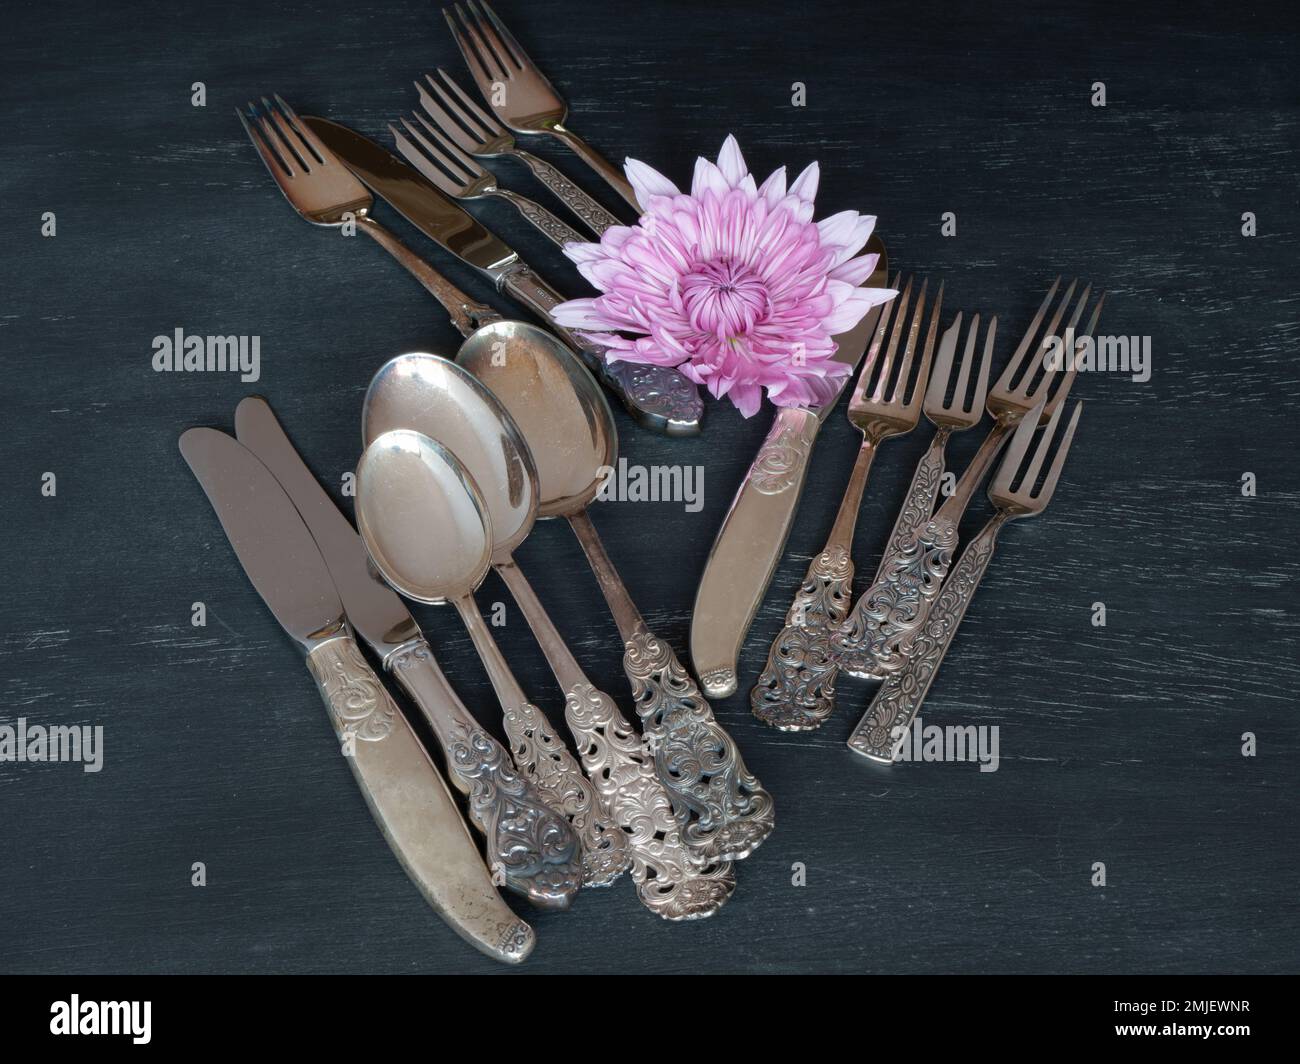 An assortment of silver spoons, knives, and forks on a table. Stock Photo